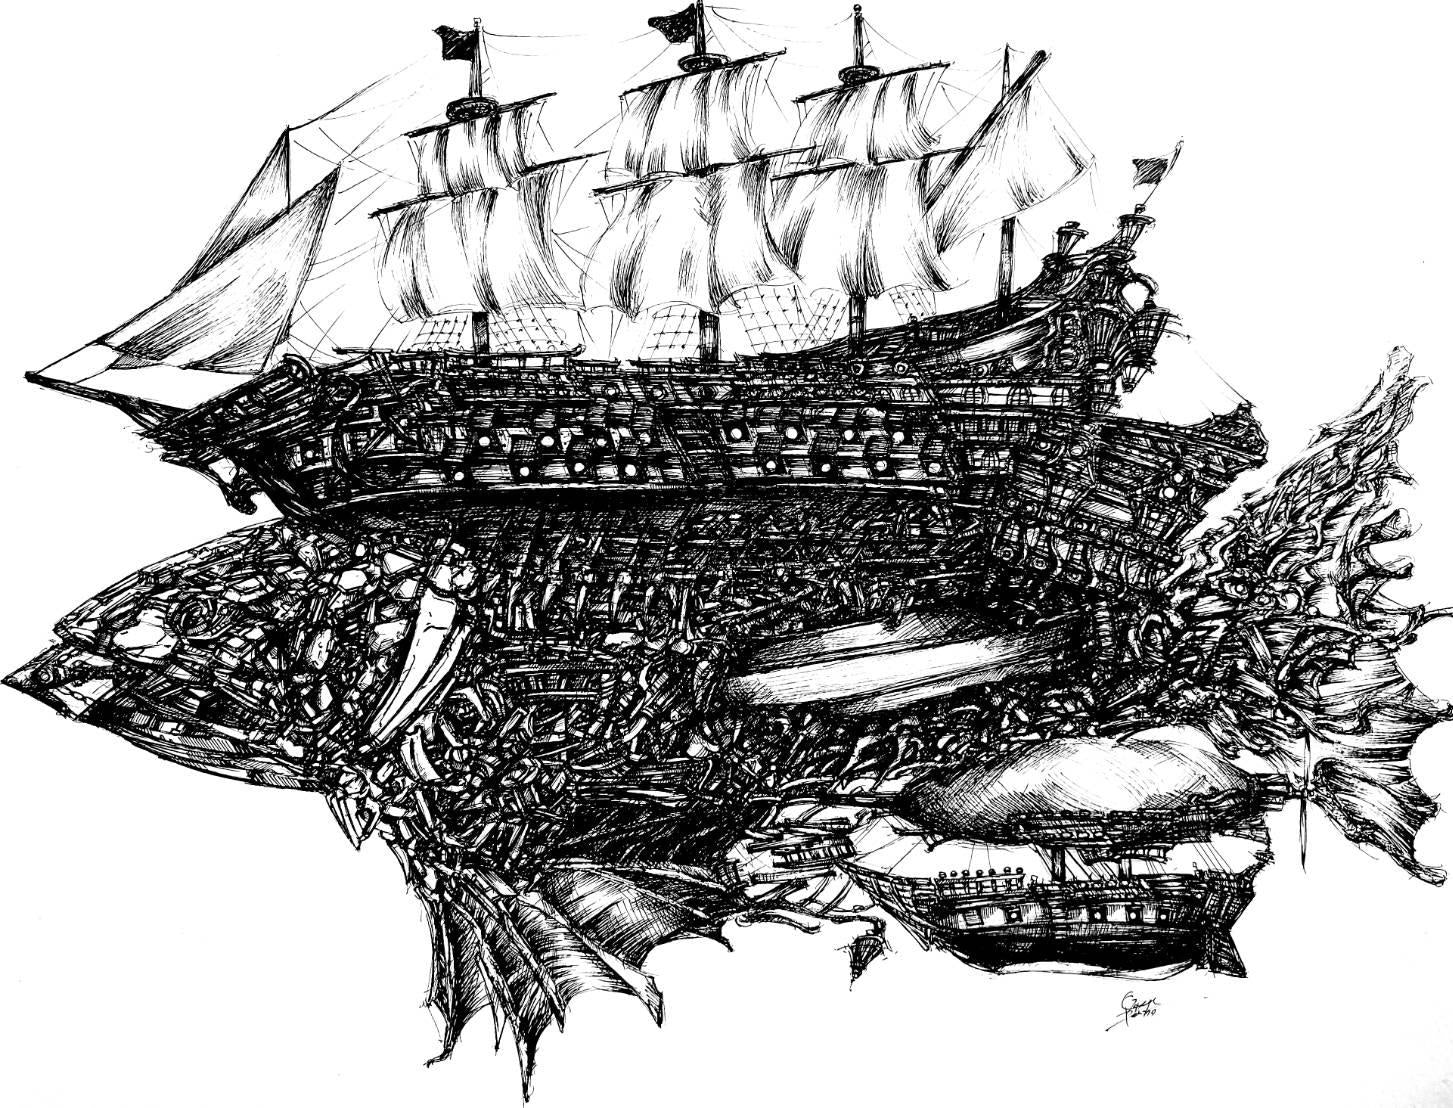 pirate ship - FROM ARTIST